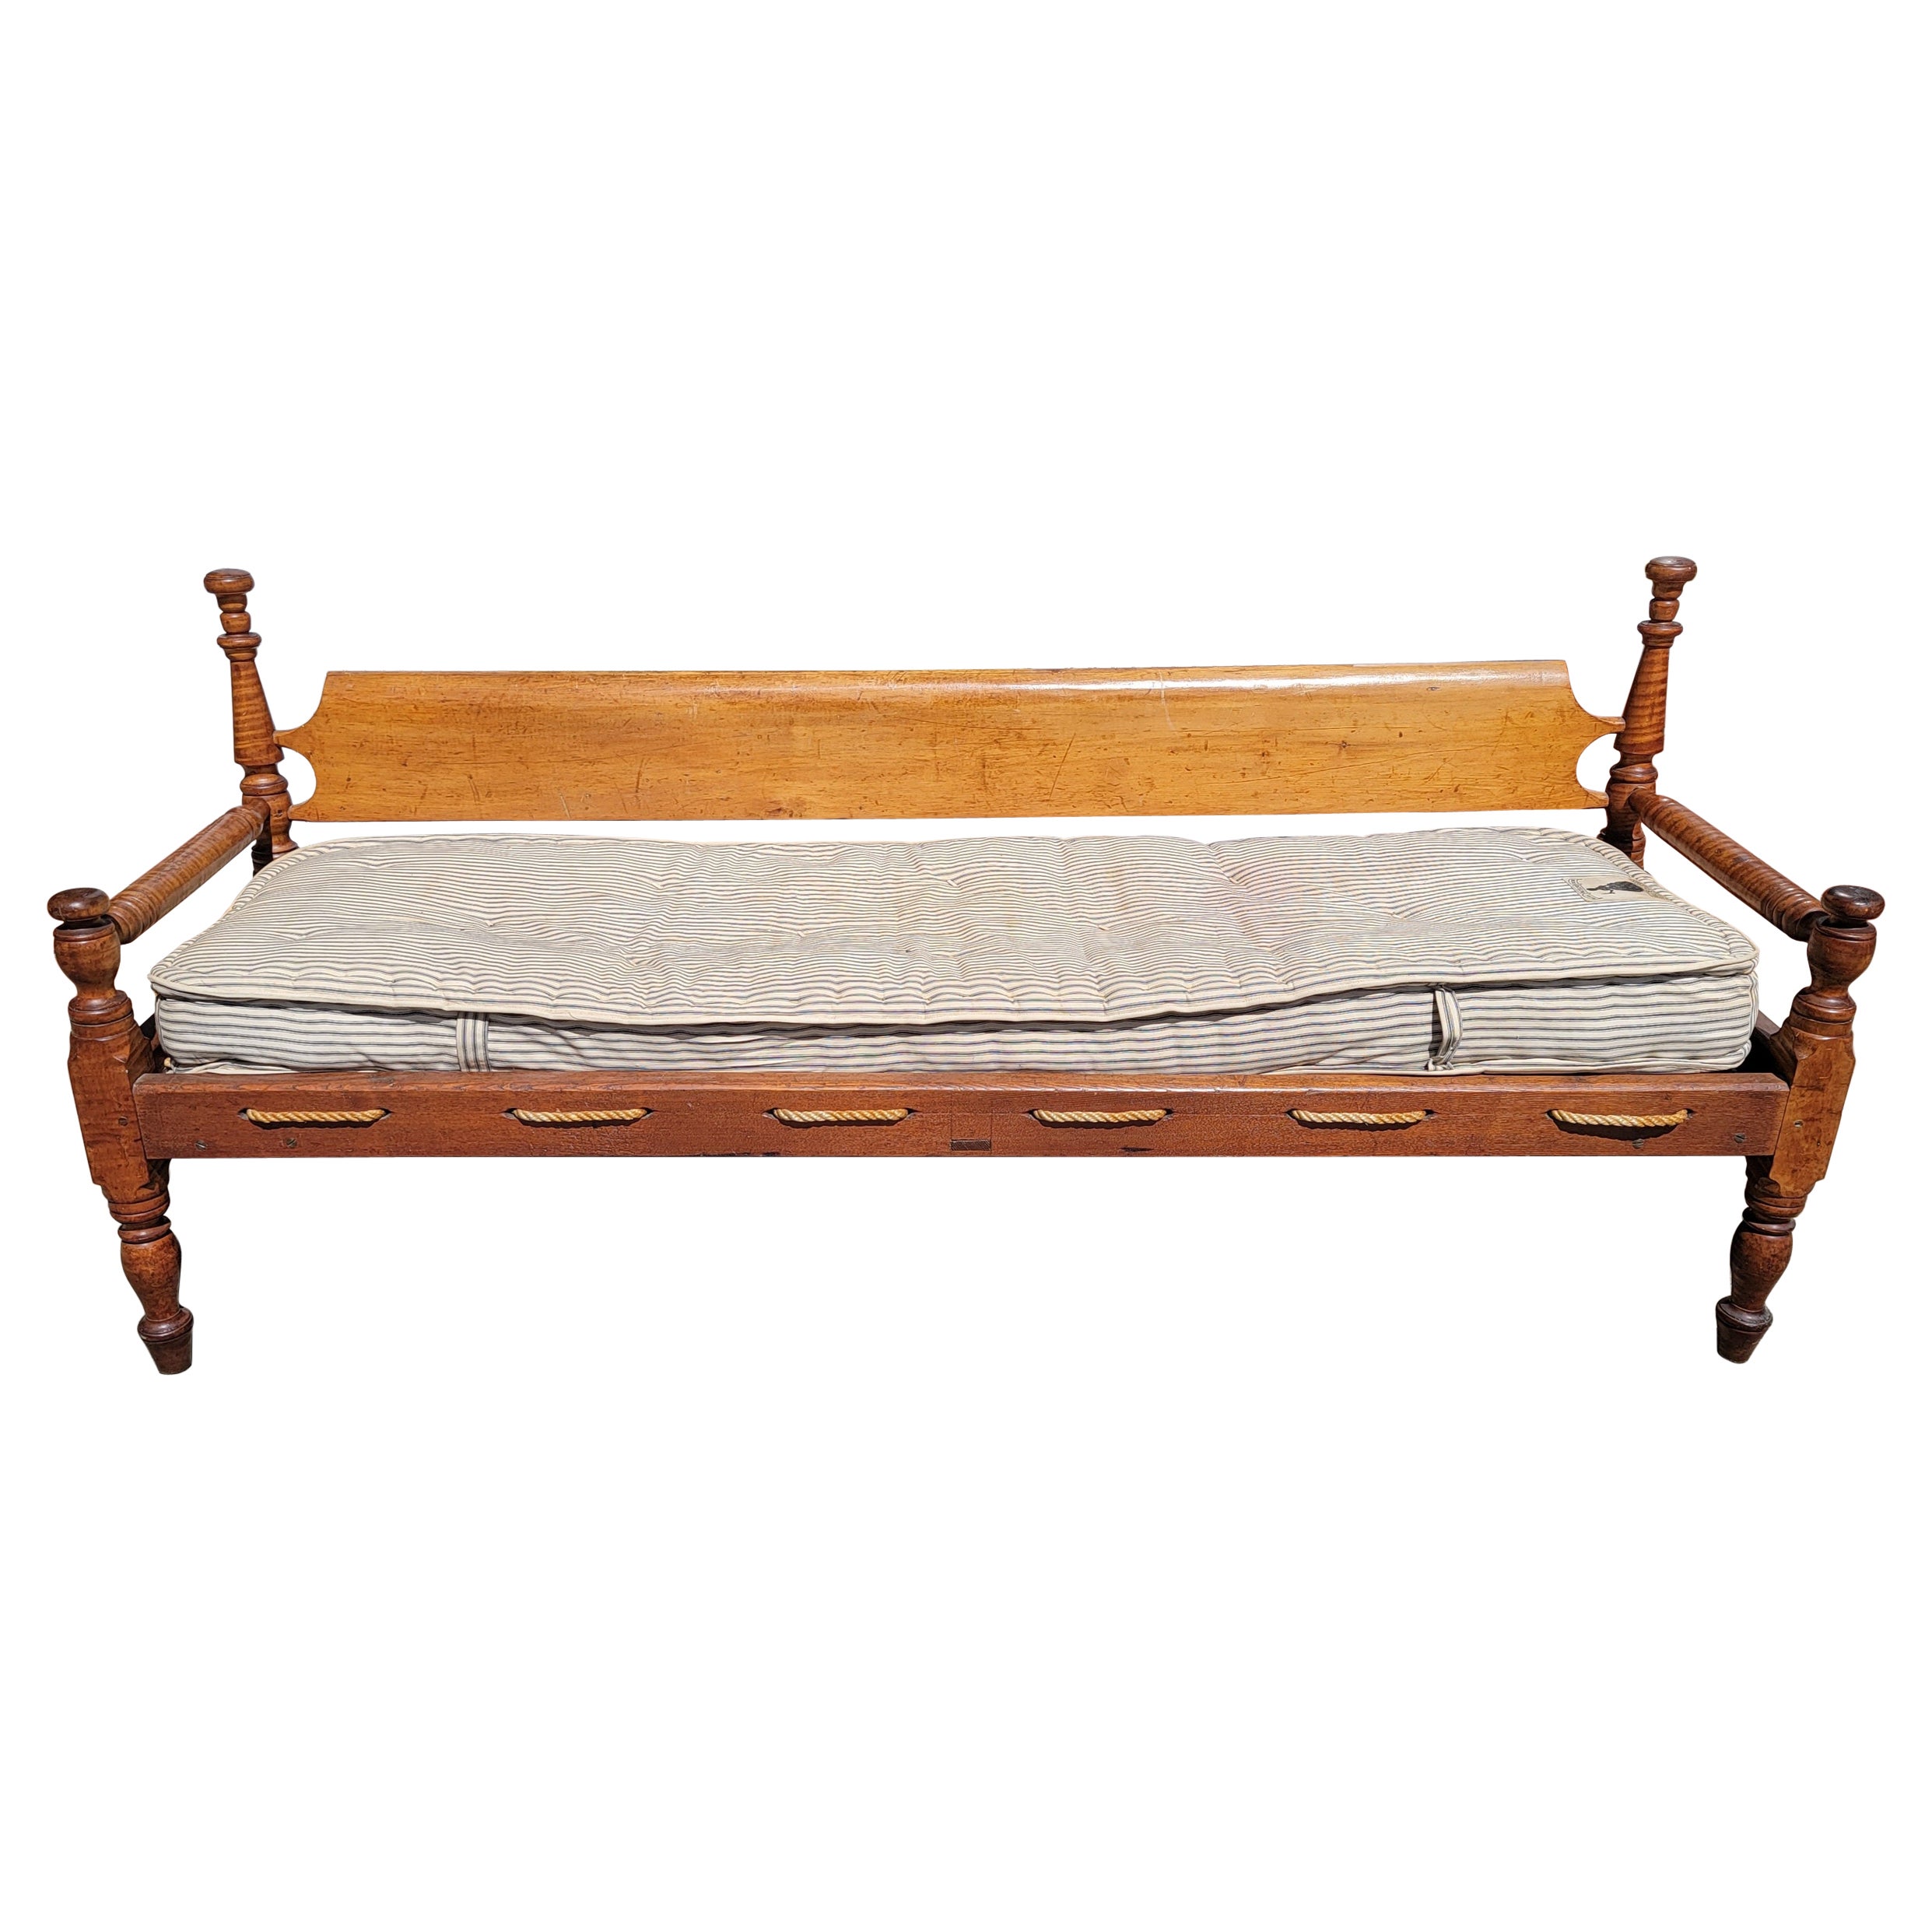 Hand-Crafted 19th C Birdseye Maple Daybed/Settee